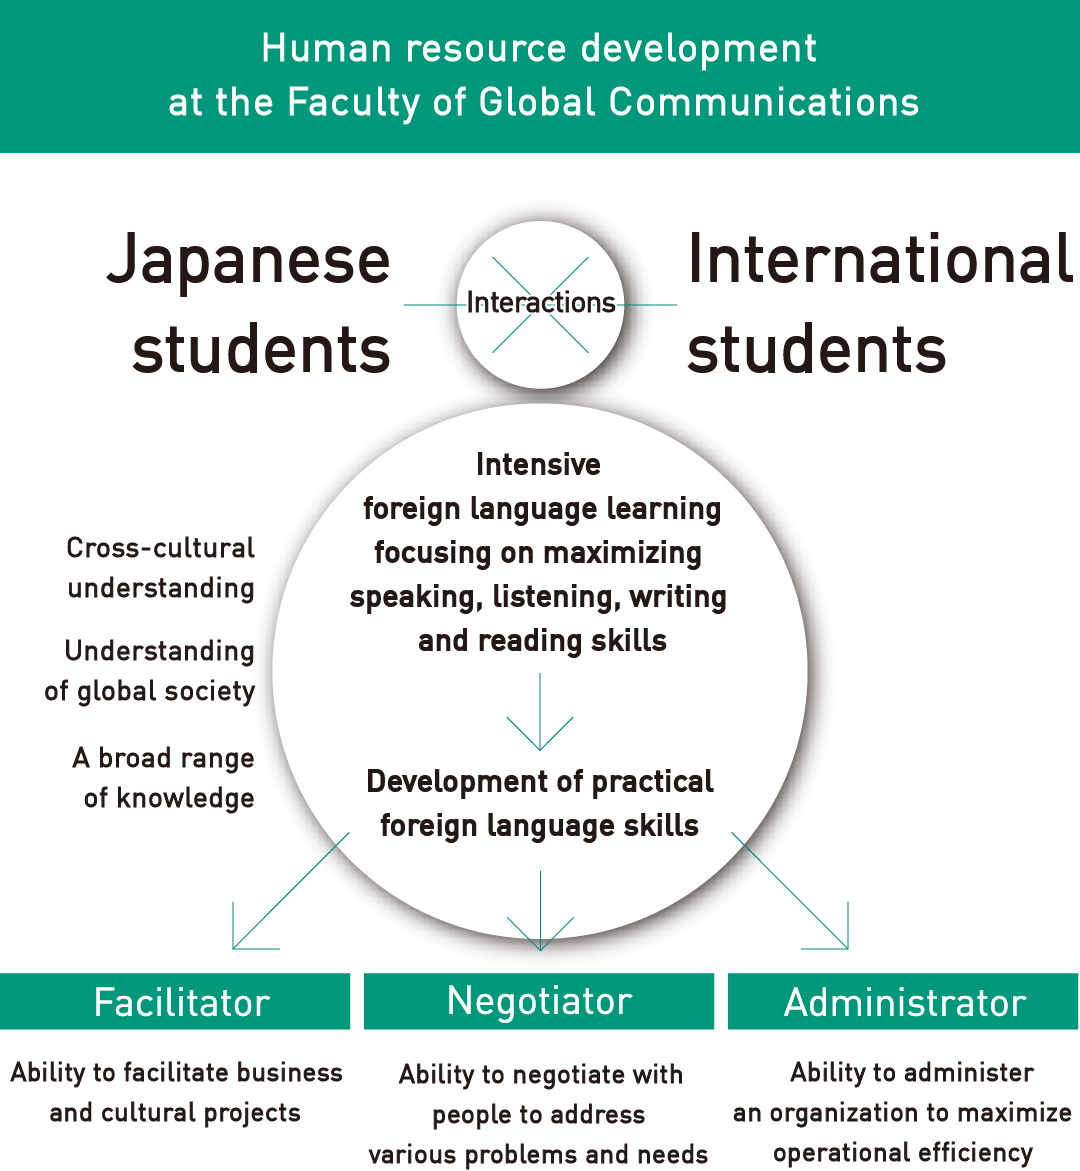 Human resource development at the Faculty of Global Communications